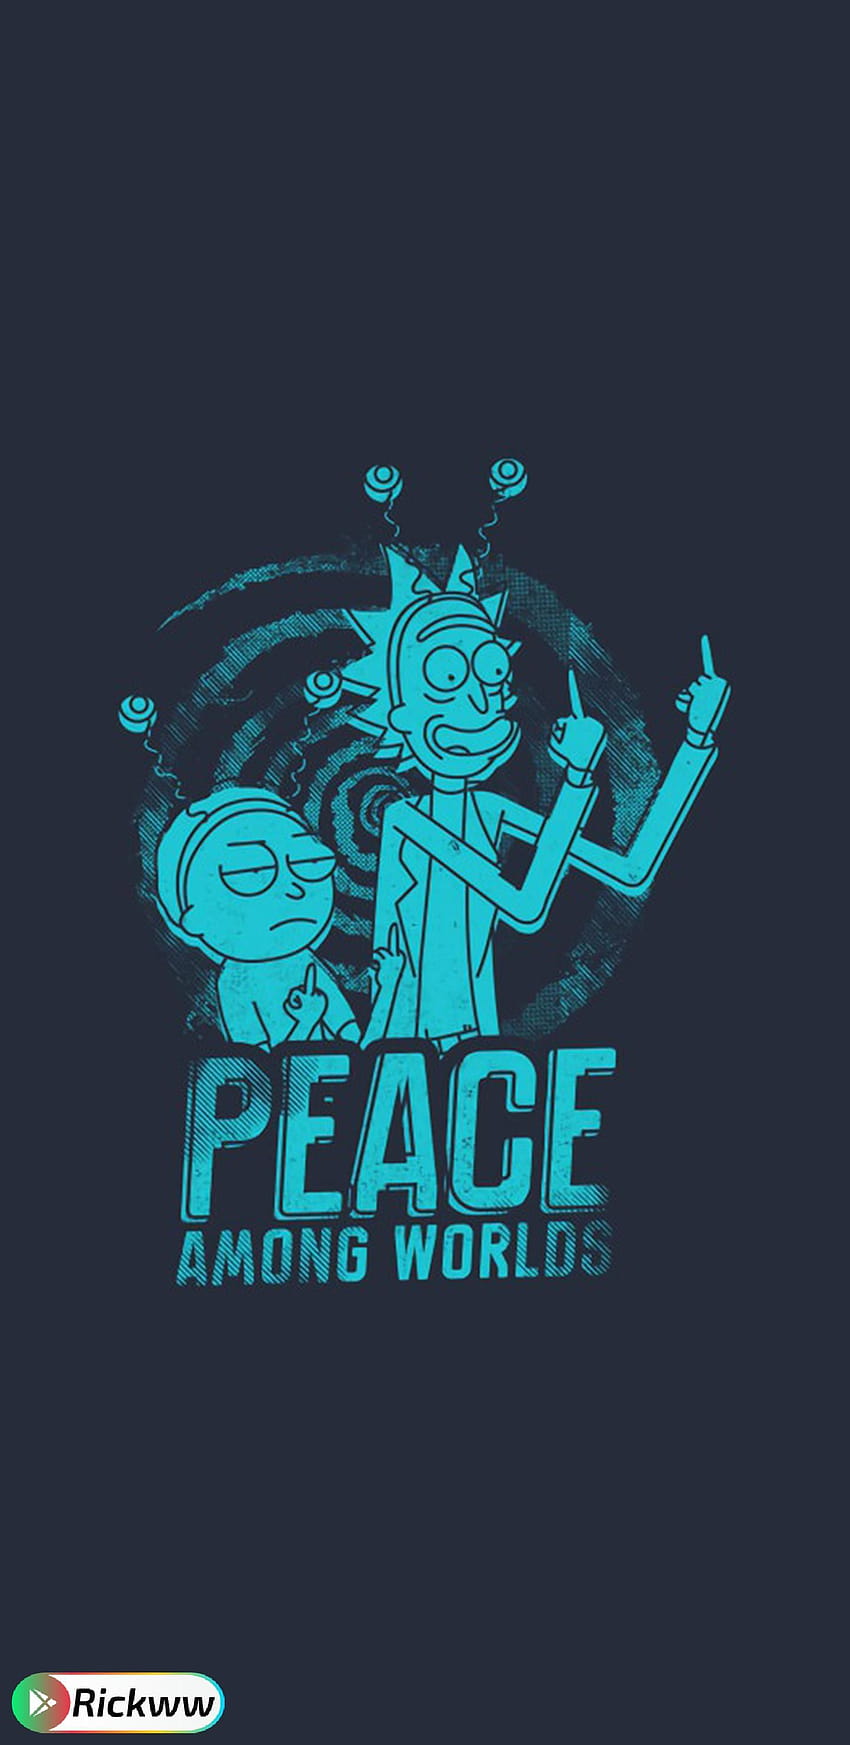 Peace among worlds Rickww, iphone 8 plus rick and morty HD phone wallpaper